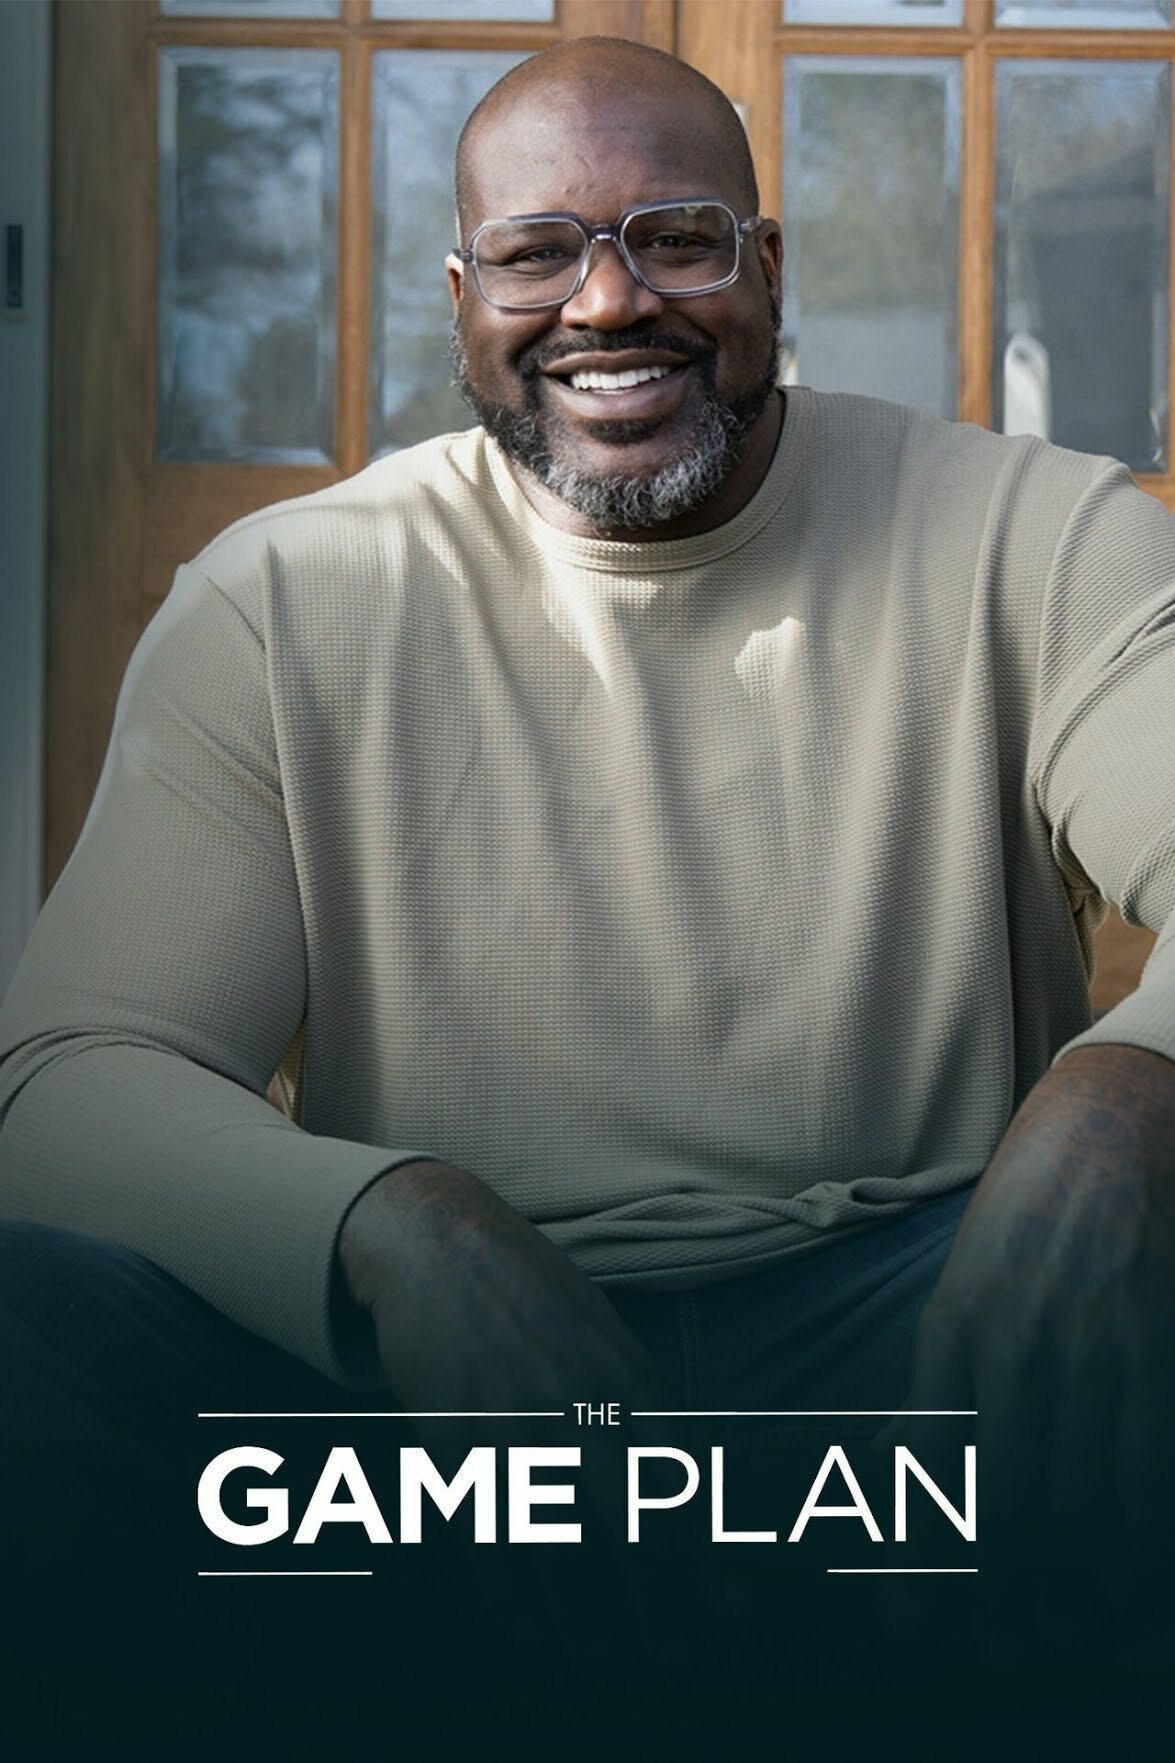 The Game Plan with Shaquille O'Neal ne zaman